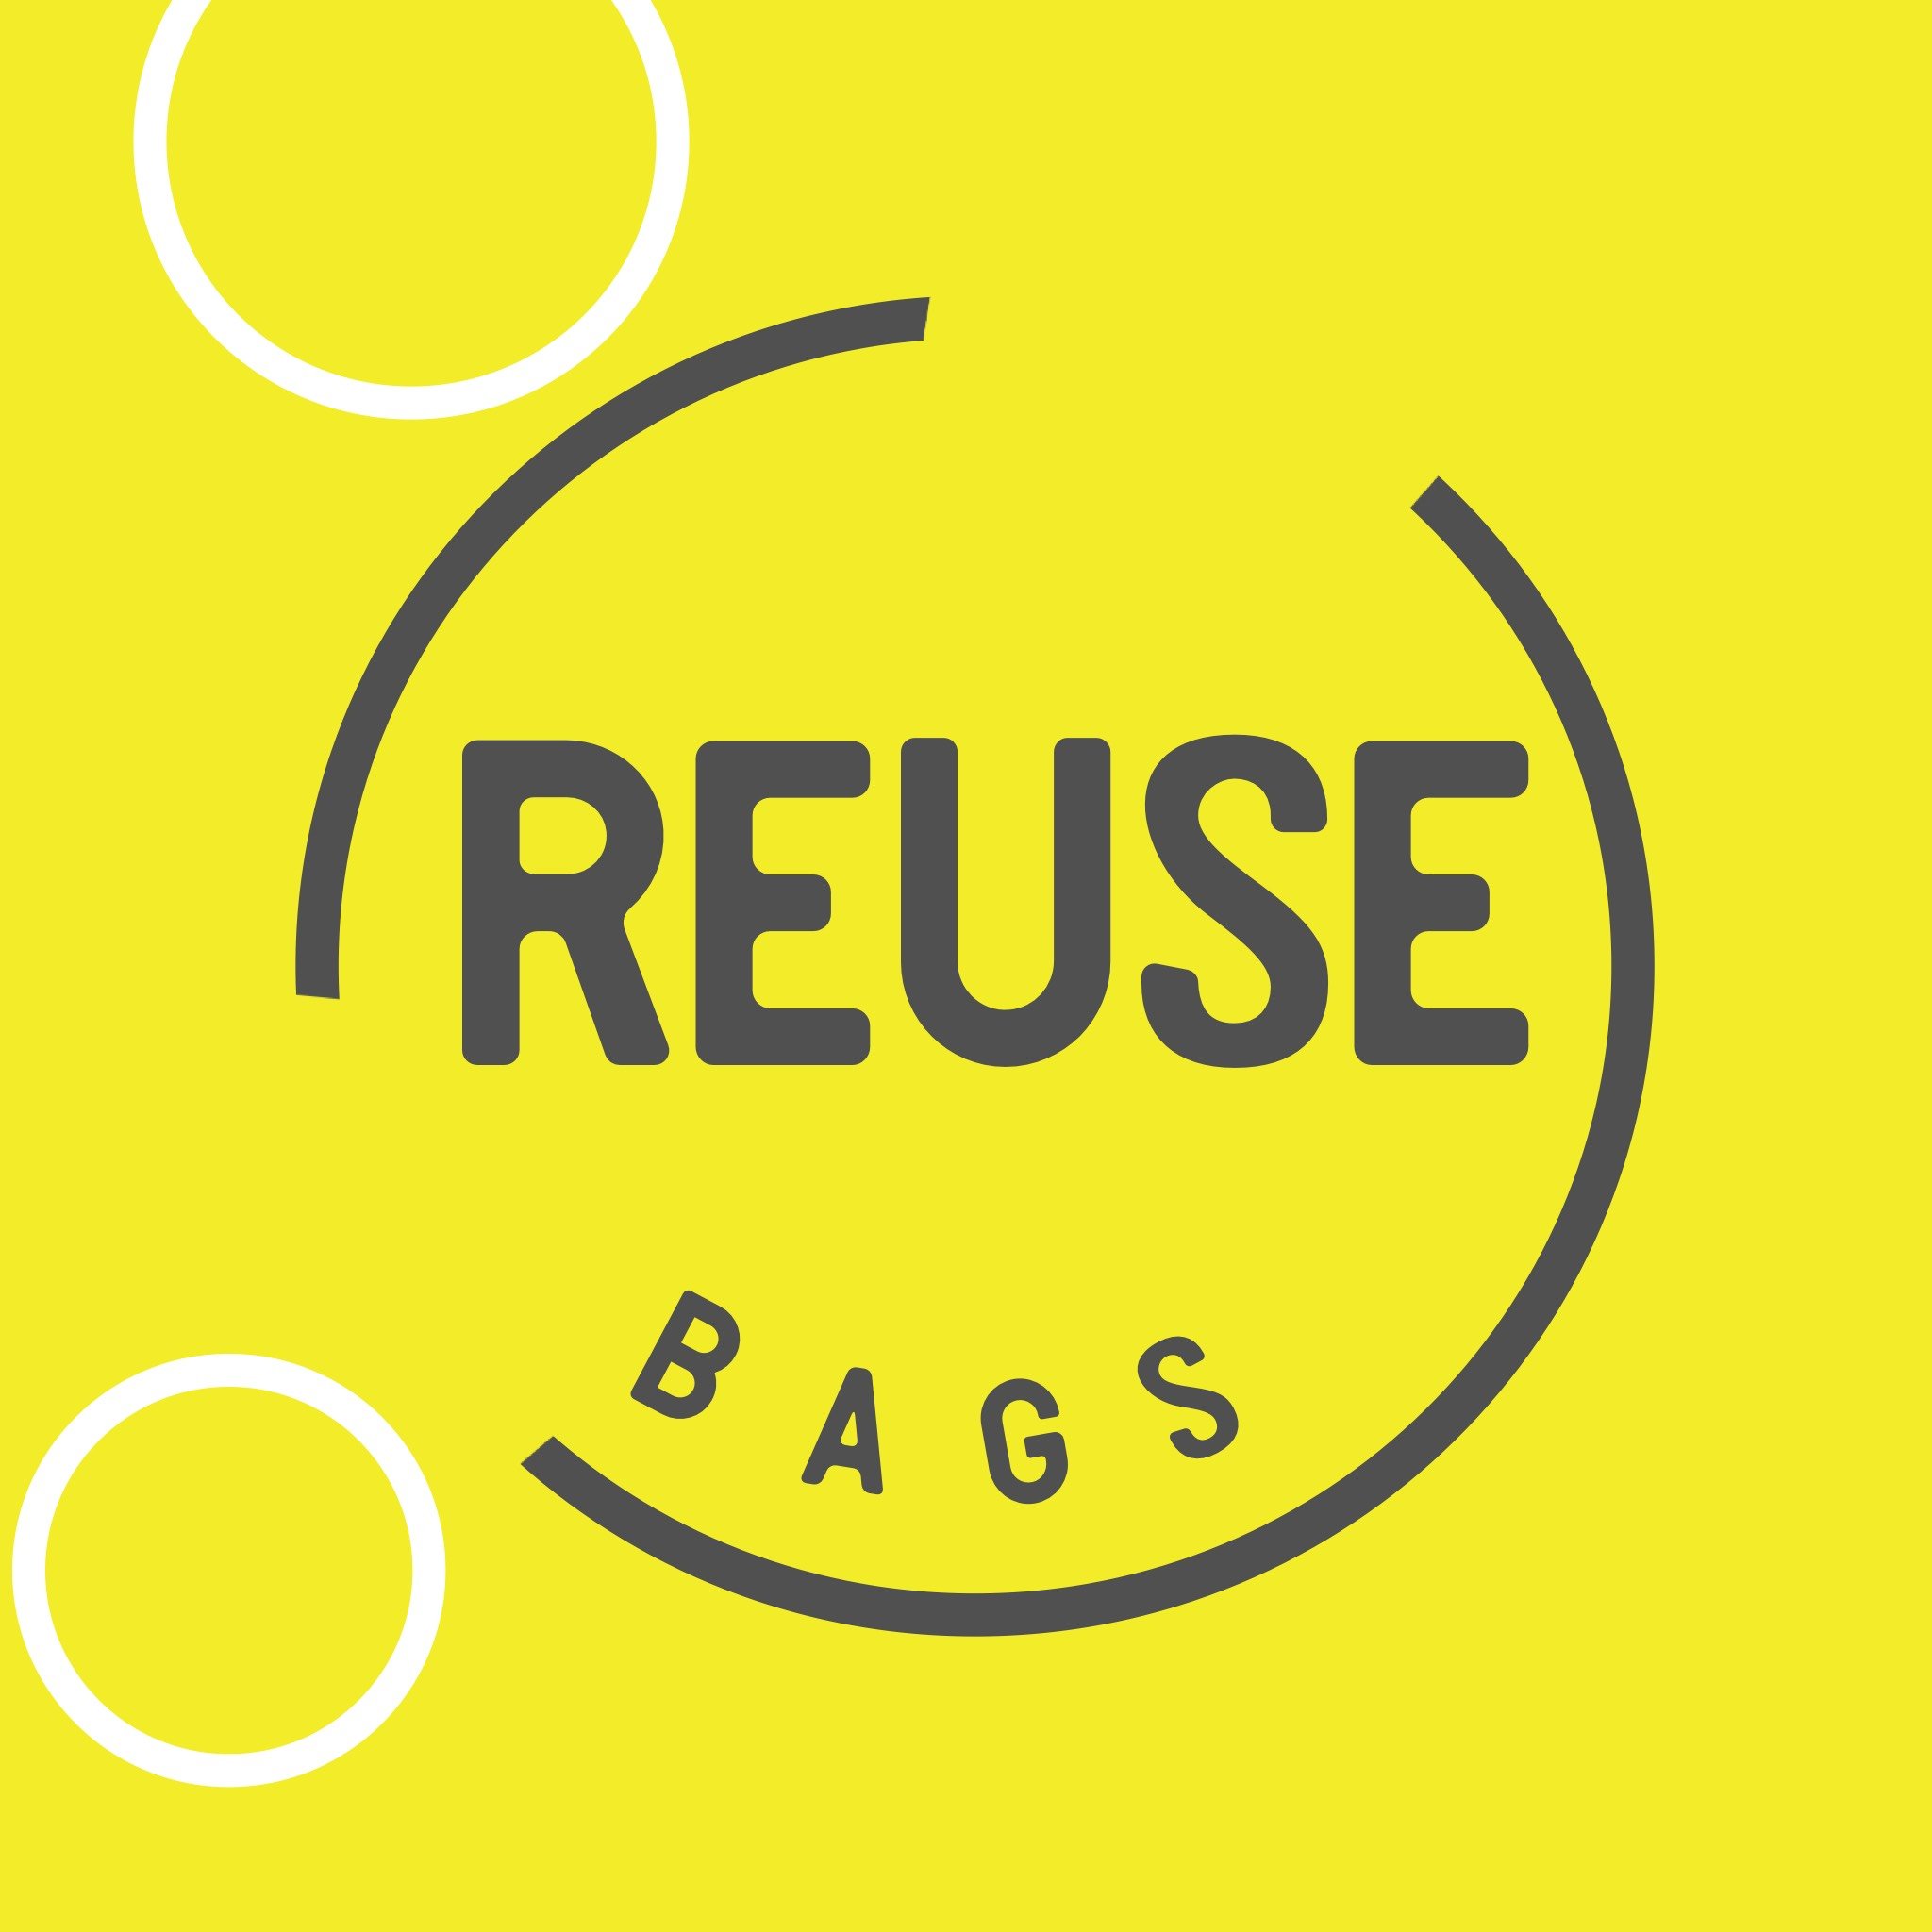 Reuse Bags are mesh bags for produce, made as an alternative to single-use plastic bags. 
2020 Small Business BC Top 5 Premier’s People’s Choice.